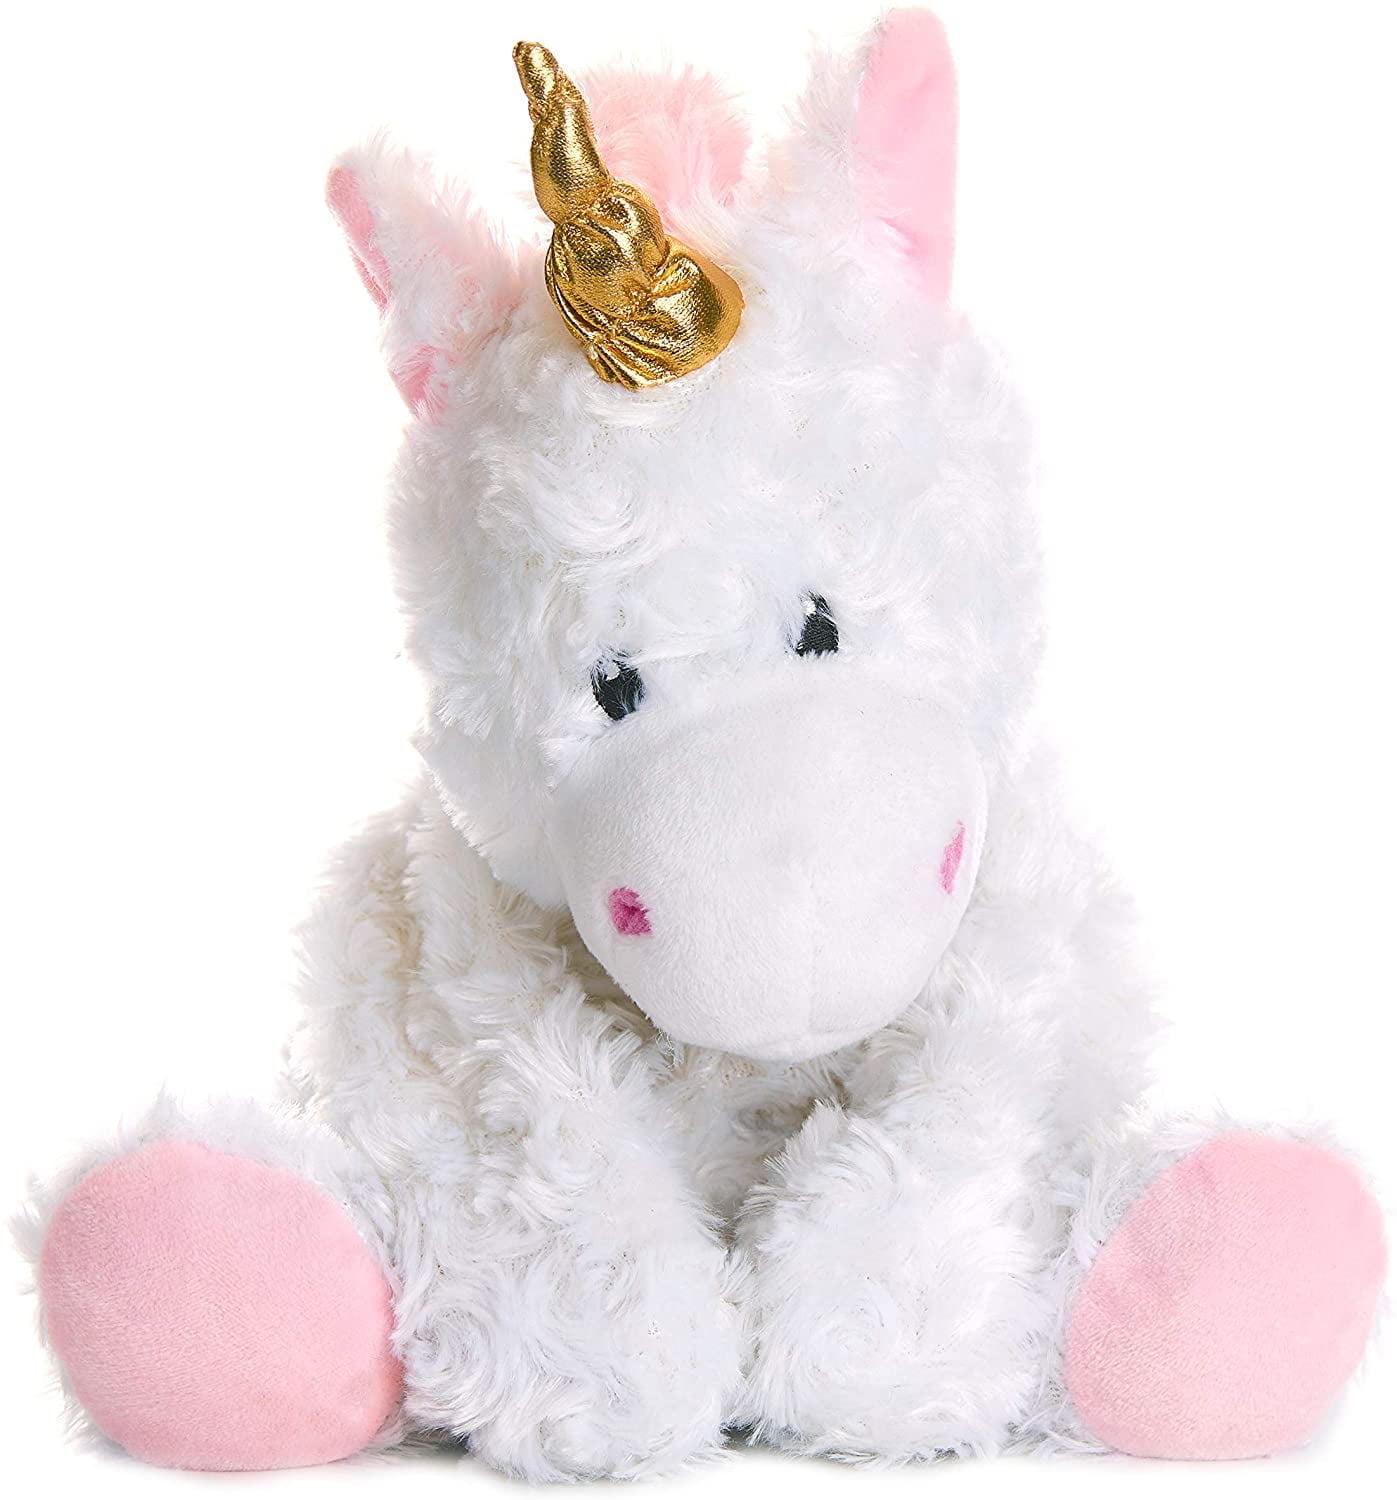 Warm Pals Microwavable Lavender Scented Plush Toy Stuffed Animal - Magical  Unicorn 